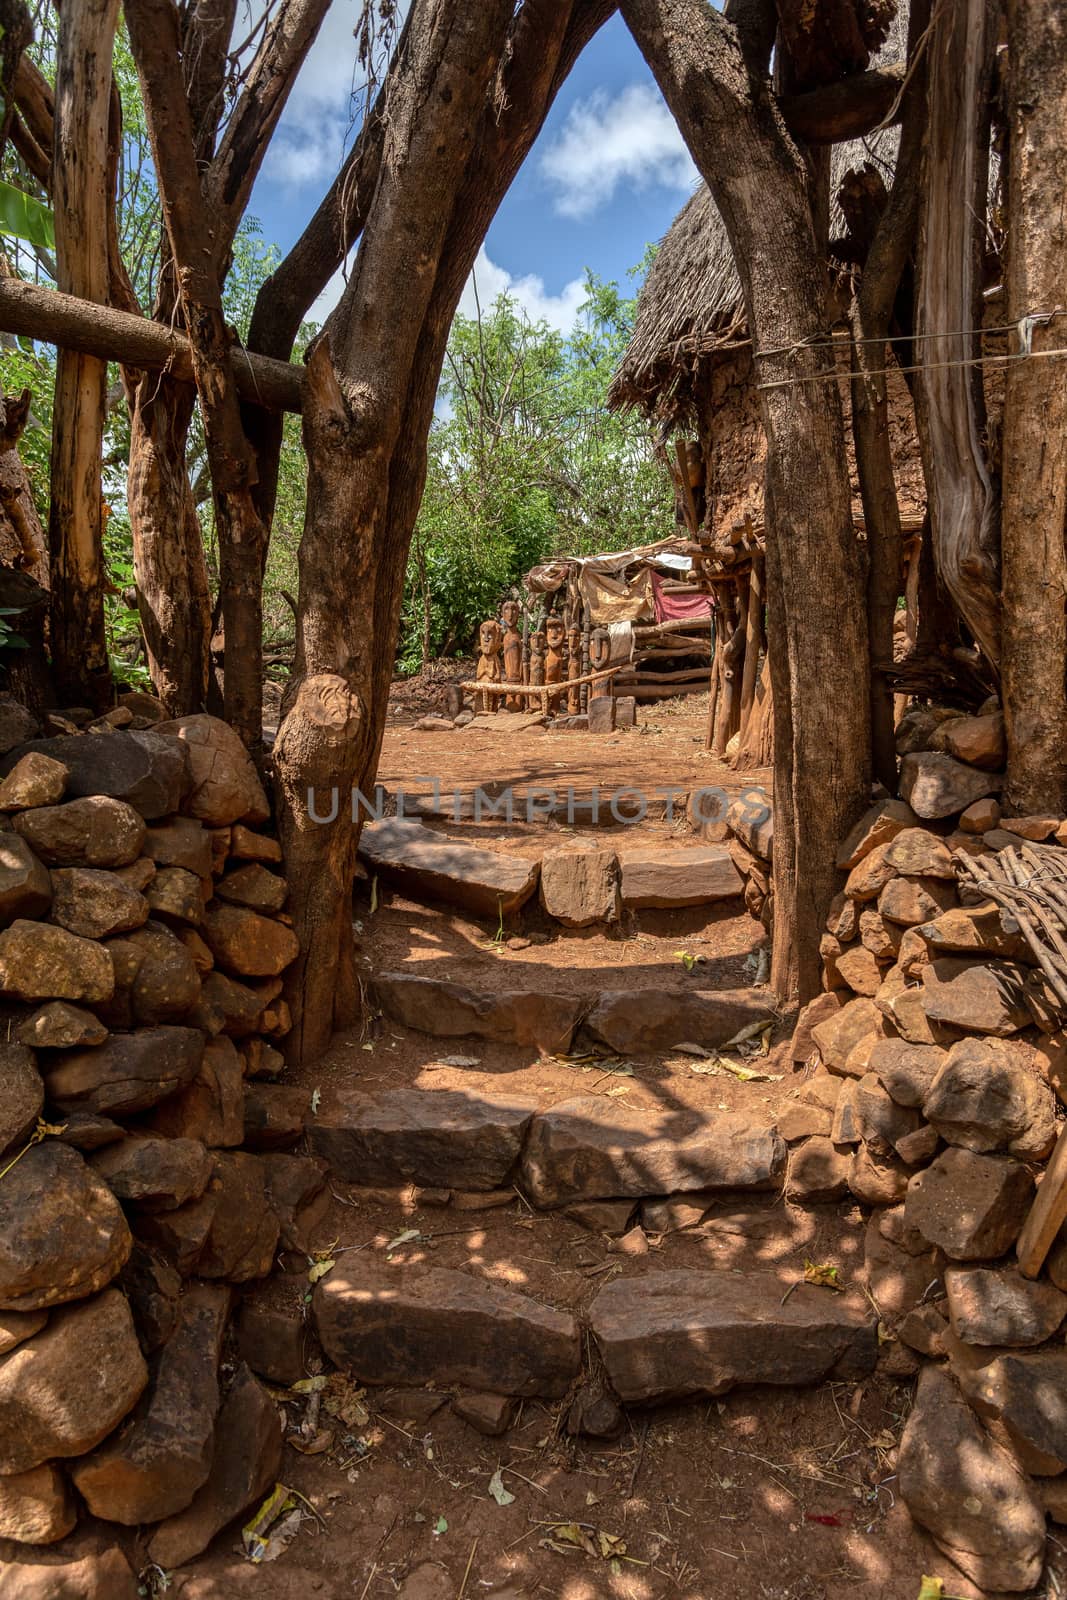 Simple stone stairs to house in walled village tribes Konso. African village. Africa, Ethiopia. Konso villages are listed as UNESCO World Heritage sites.